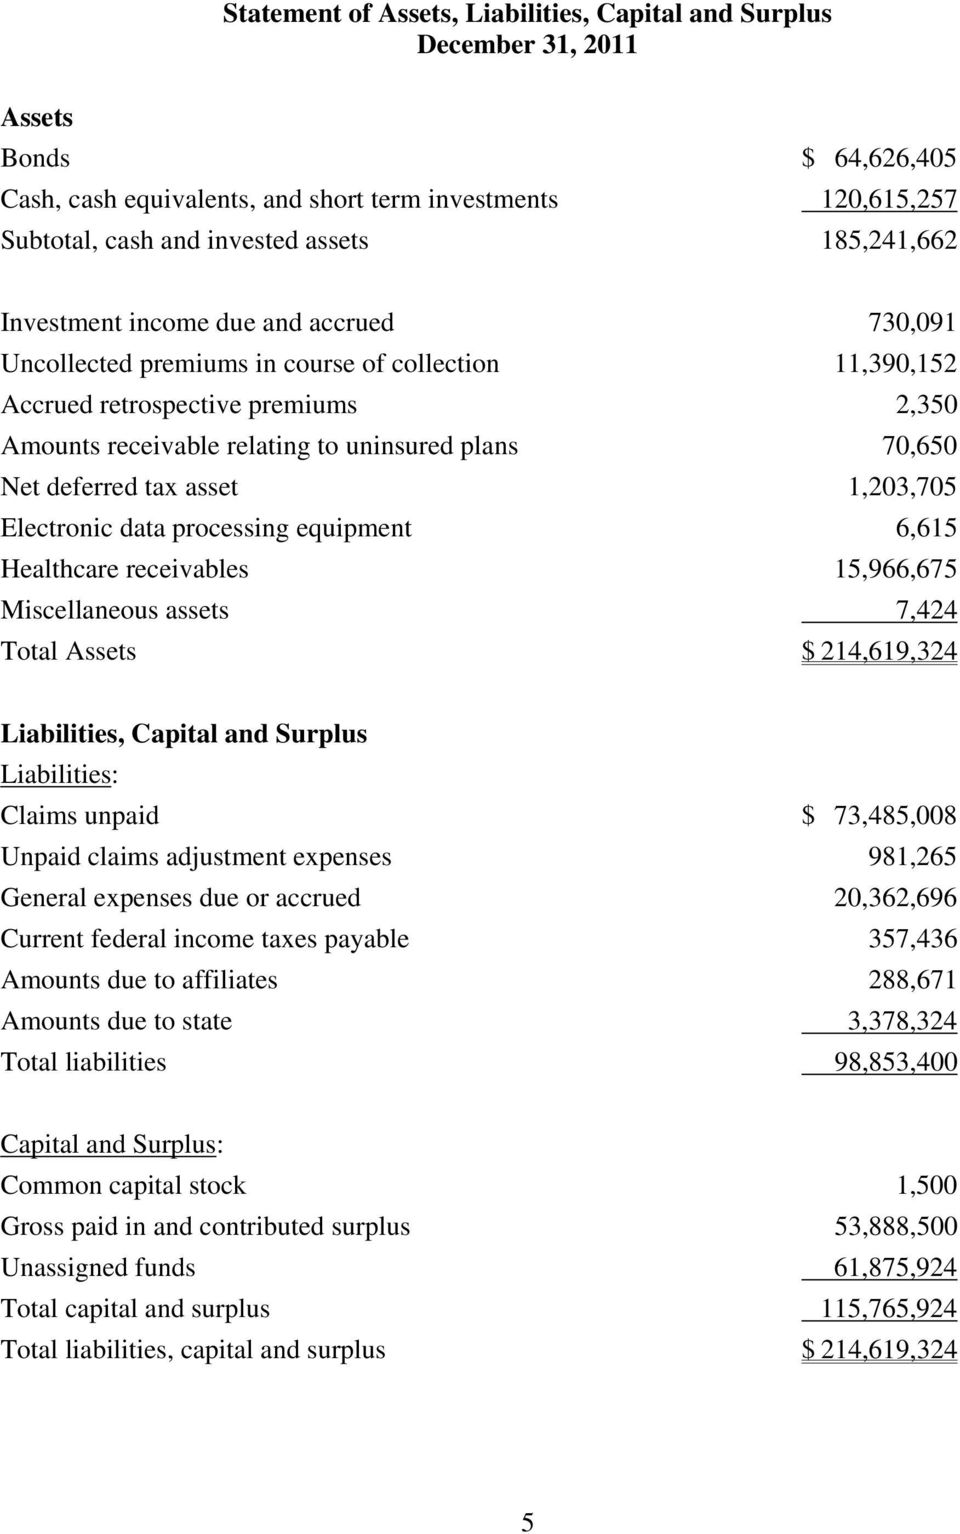 70,650 Net deferred tax asset 1,203,705 Electronic data processing equipment 6,615 Healthcare receivables 15,966,675 Miscellaneous assets 7,424 Total Assets $ 214,619,324 Liabilities, Capital and